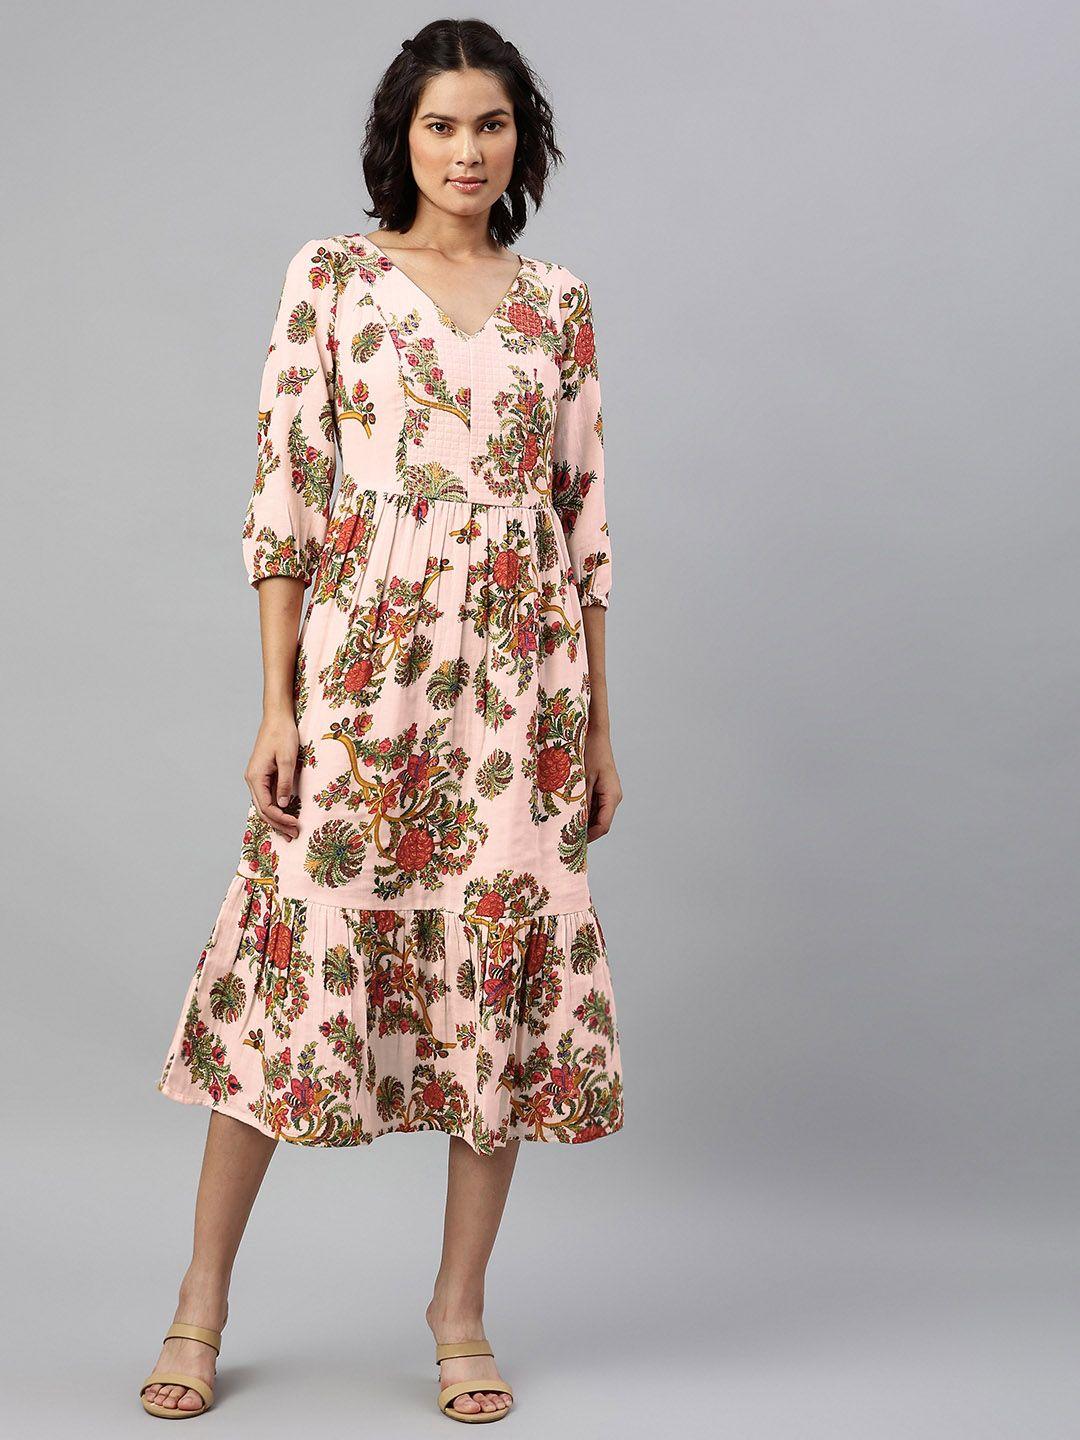 marks & spencer off white & red floral a-line midi dress